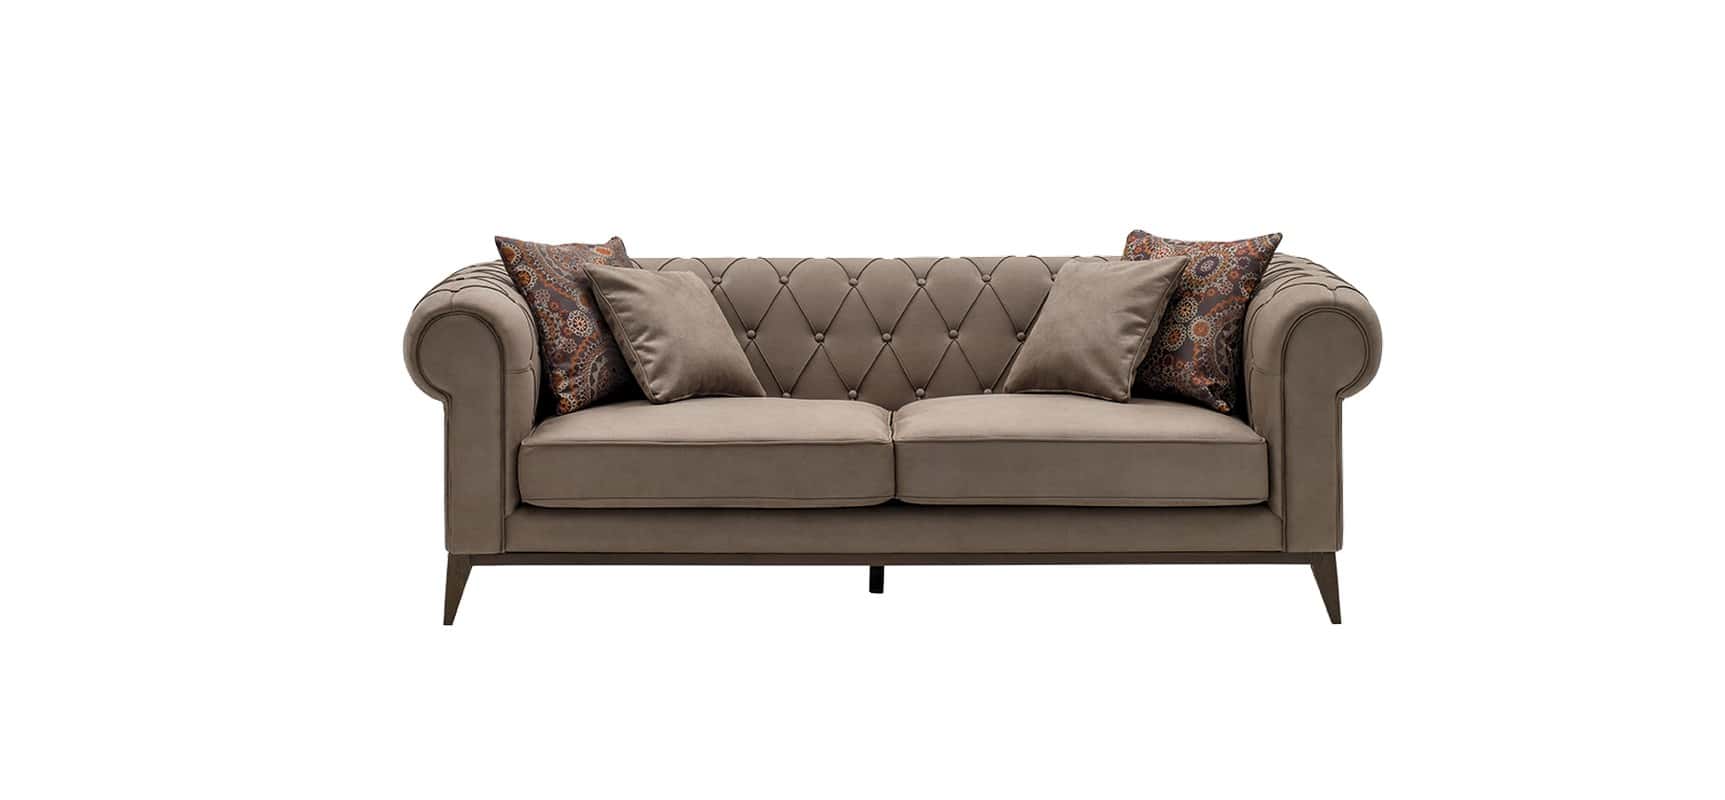 Chelsea 3 Seater Sofa by Enza Home